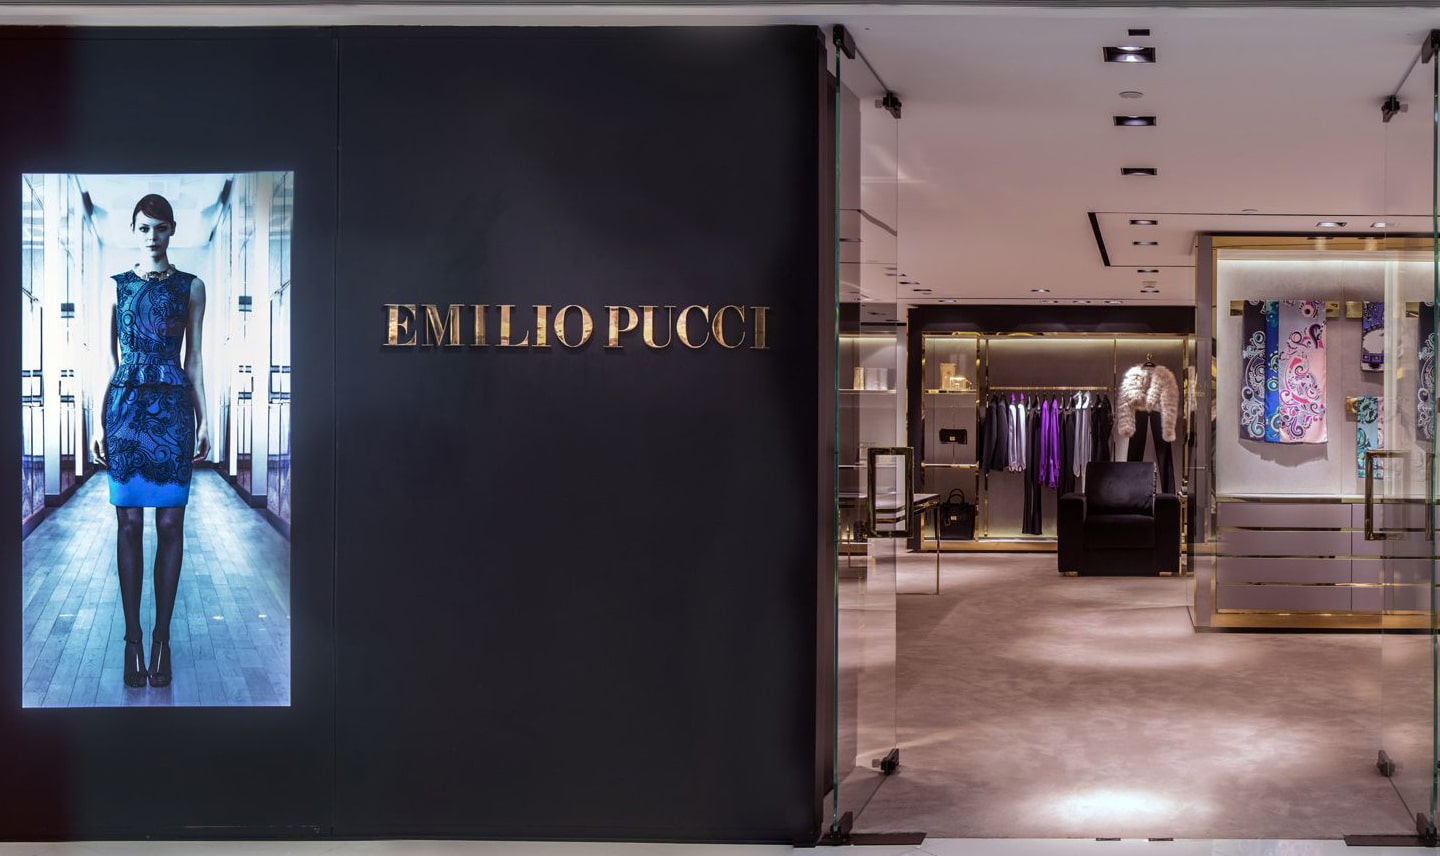 Emilio Pucci continues to expand in Asia with new store in Hong Kong